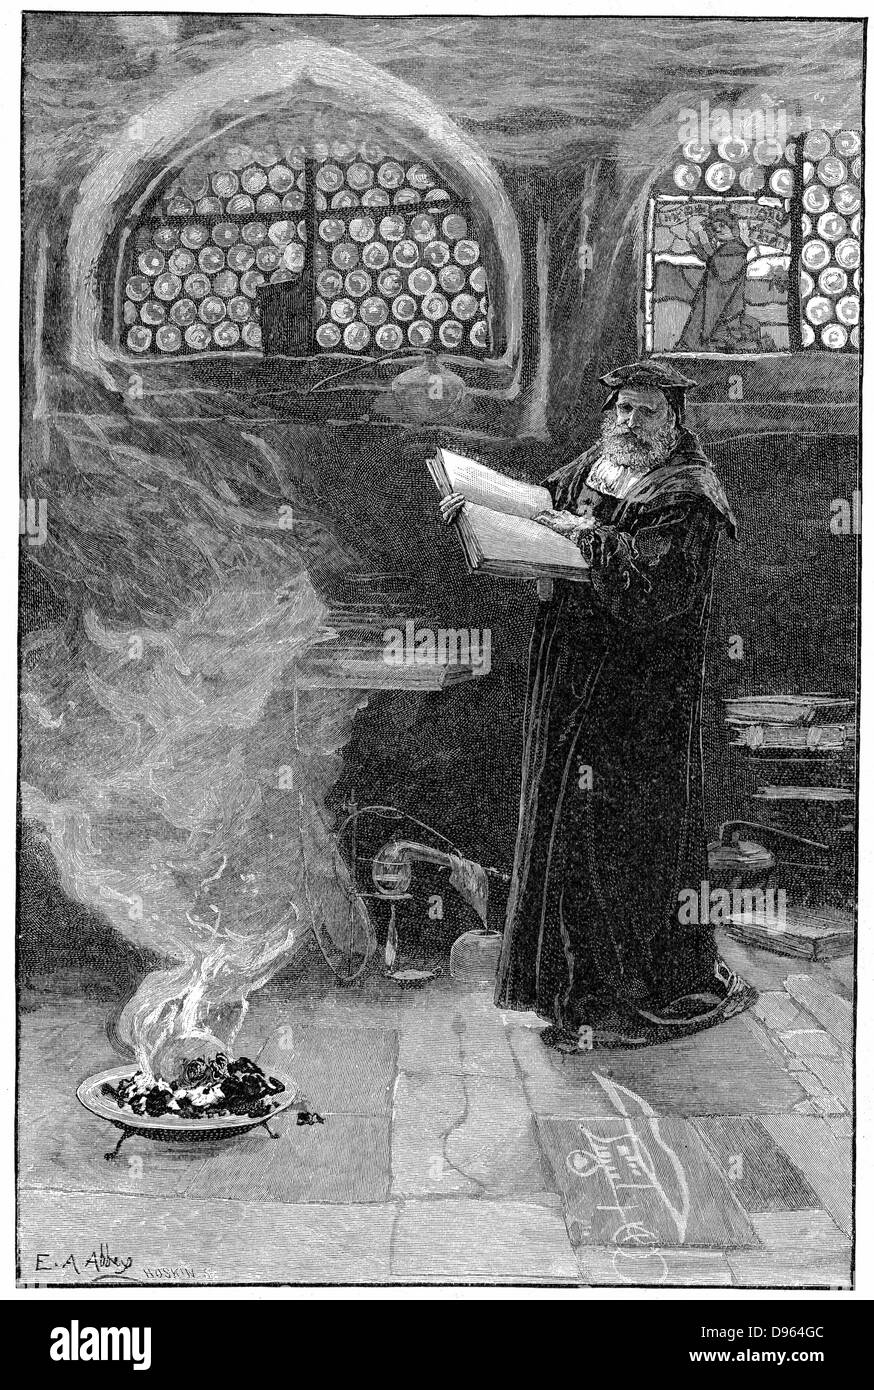 Dr Faustus conjuring up Mephistopheles. Faust formed the subject of dramas by Christopher Marlowe and Goethe. Goethe's version was the basis for Gounod's opera. Legend based on Johann Faust, German wandering conjuror and astrologer c1488-1541. Stock Photo